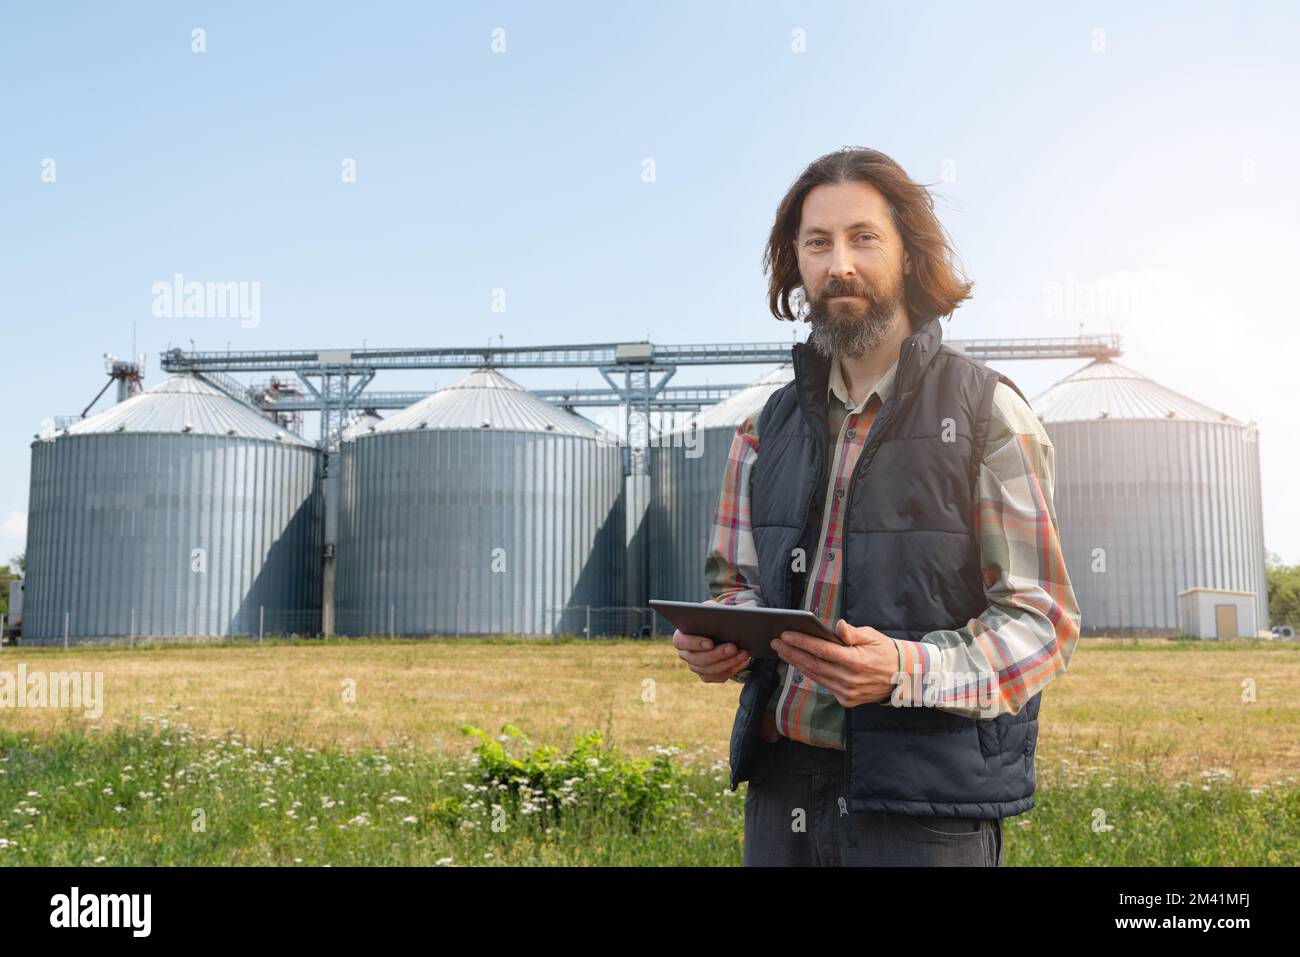 Farmer with digital tablet in front of agricultural silo Stock Photo